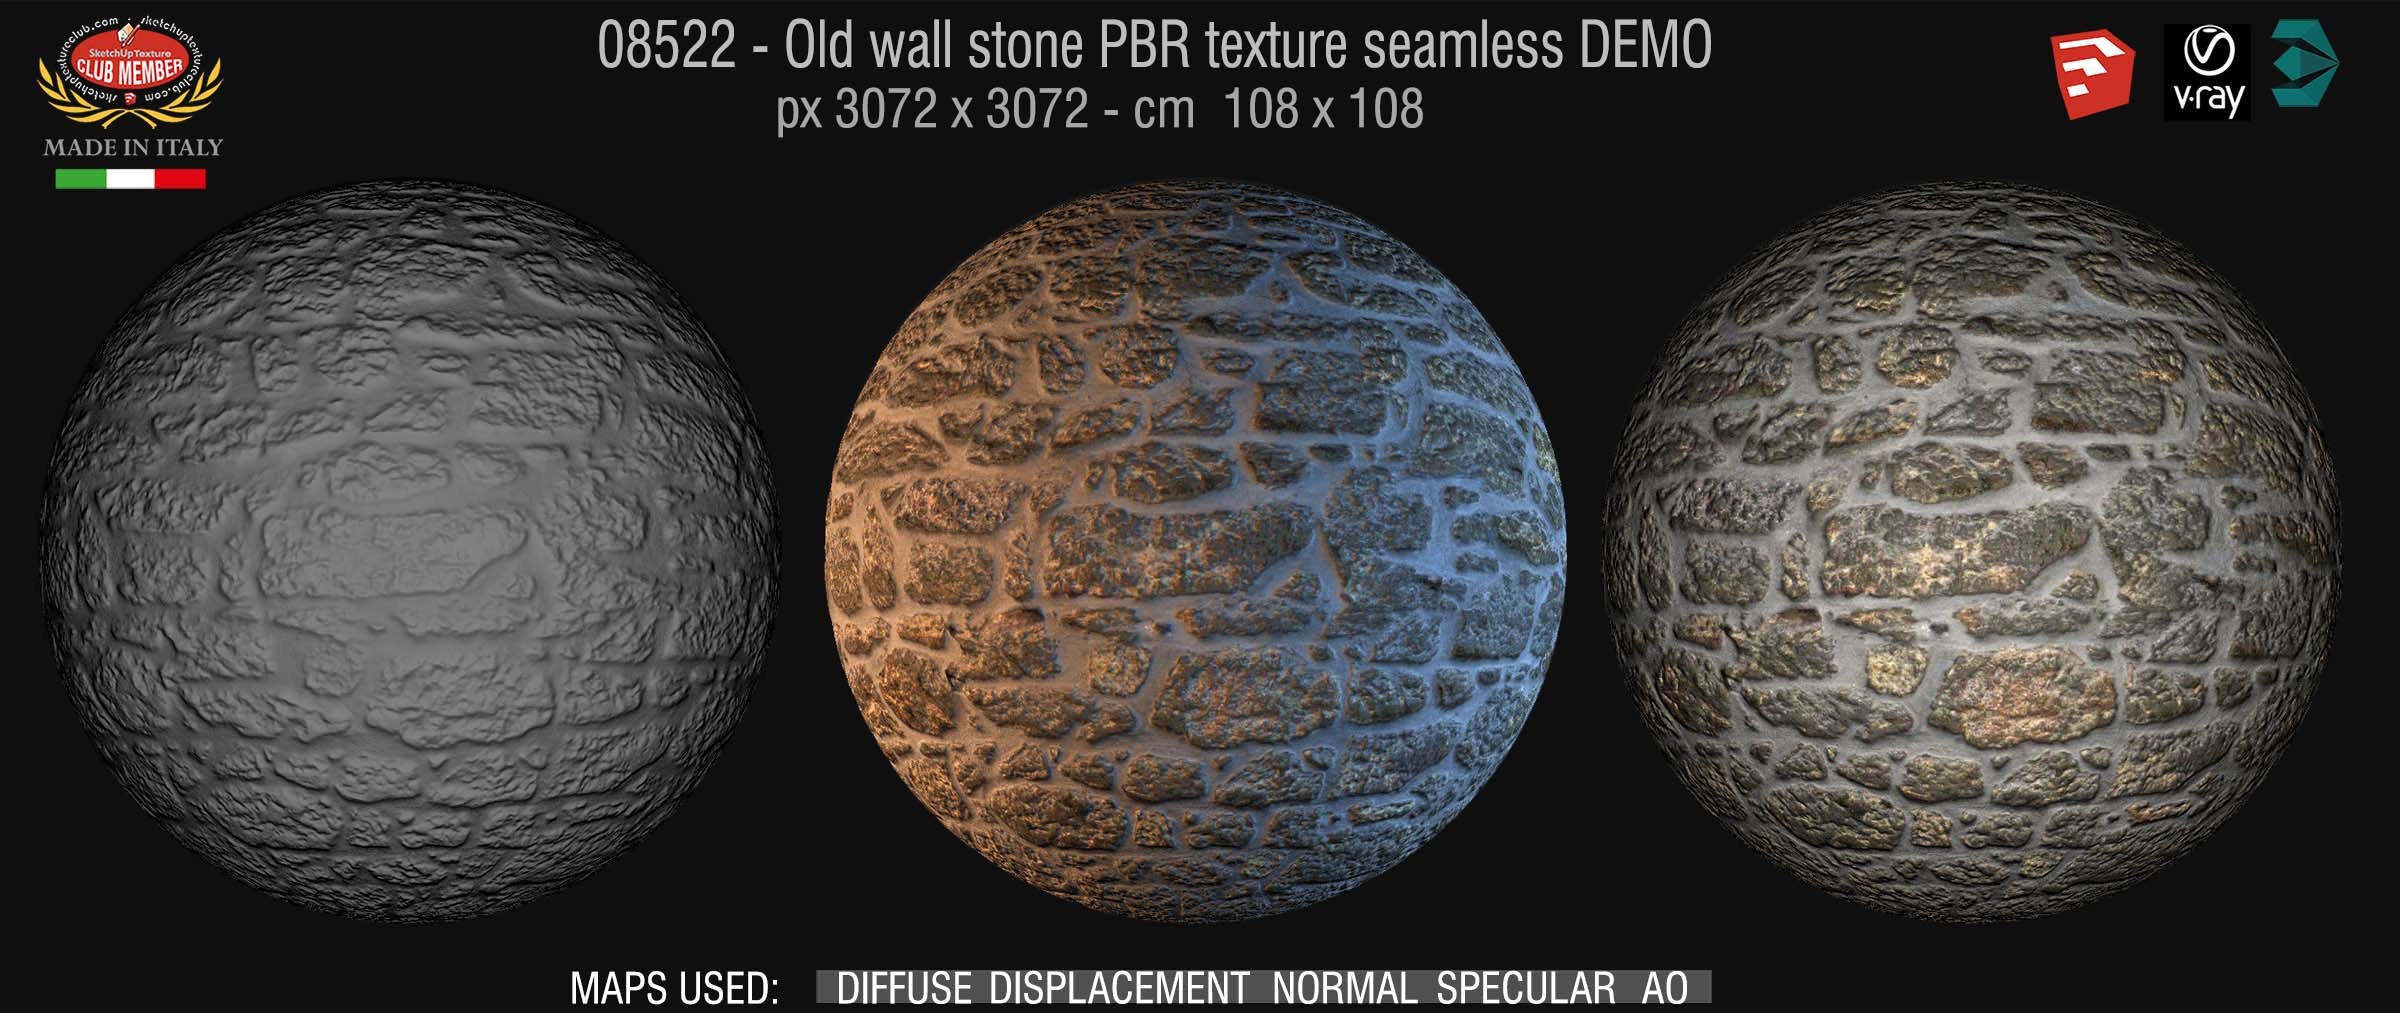 08522 Old wall stone PBR texture seamless DEMO